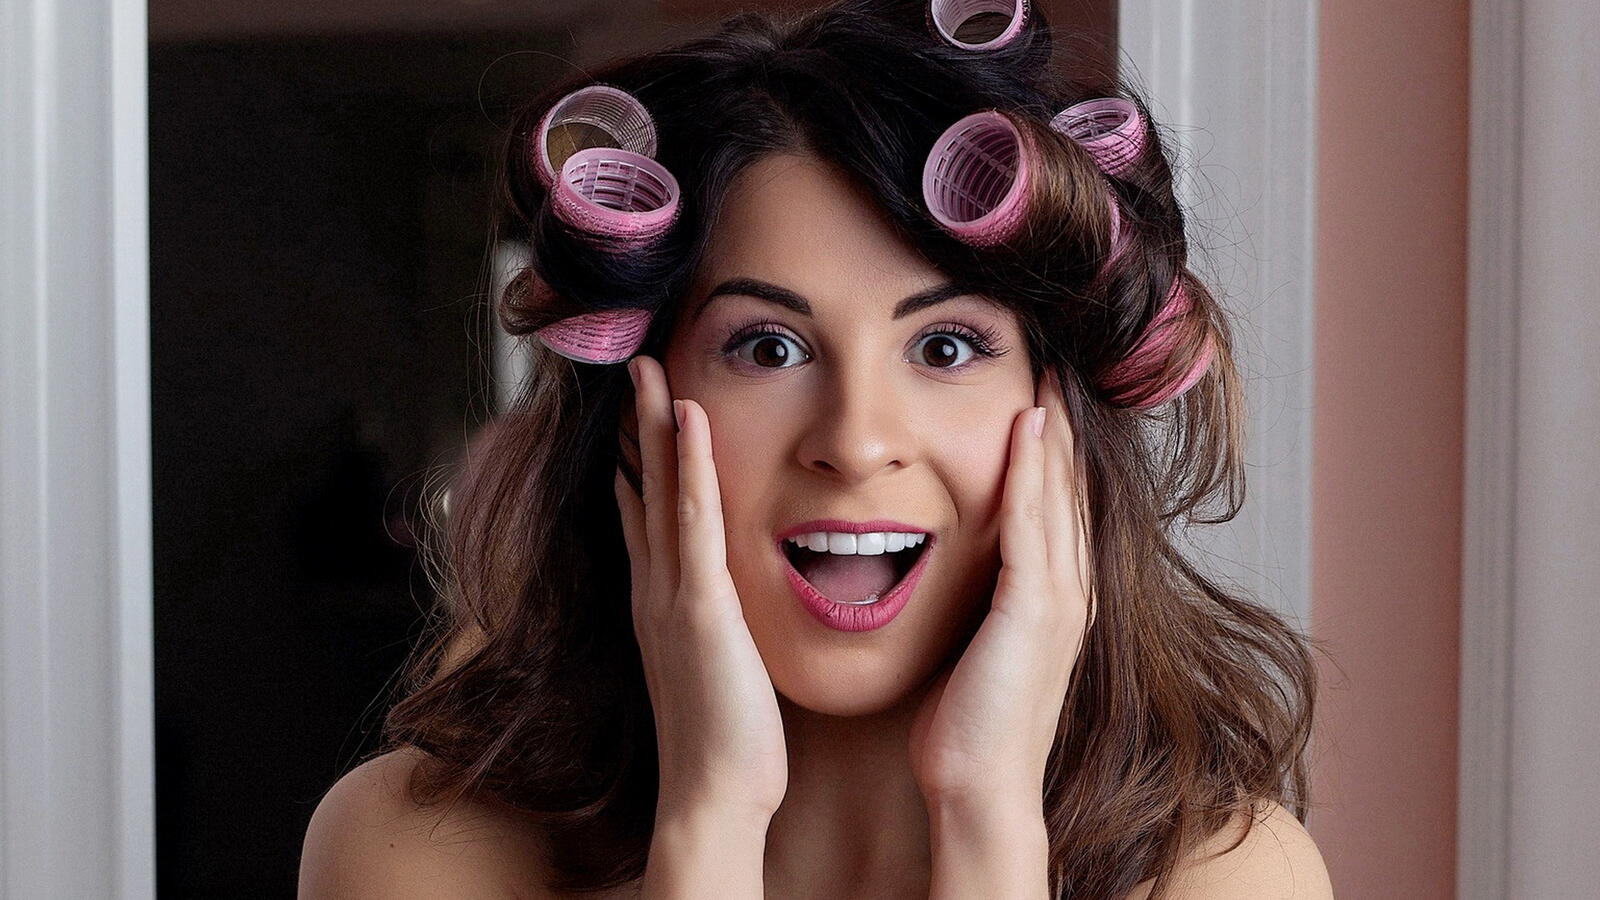 Free photo A girl and curlers